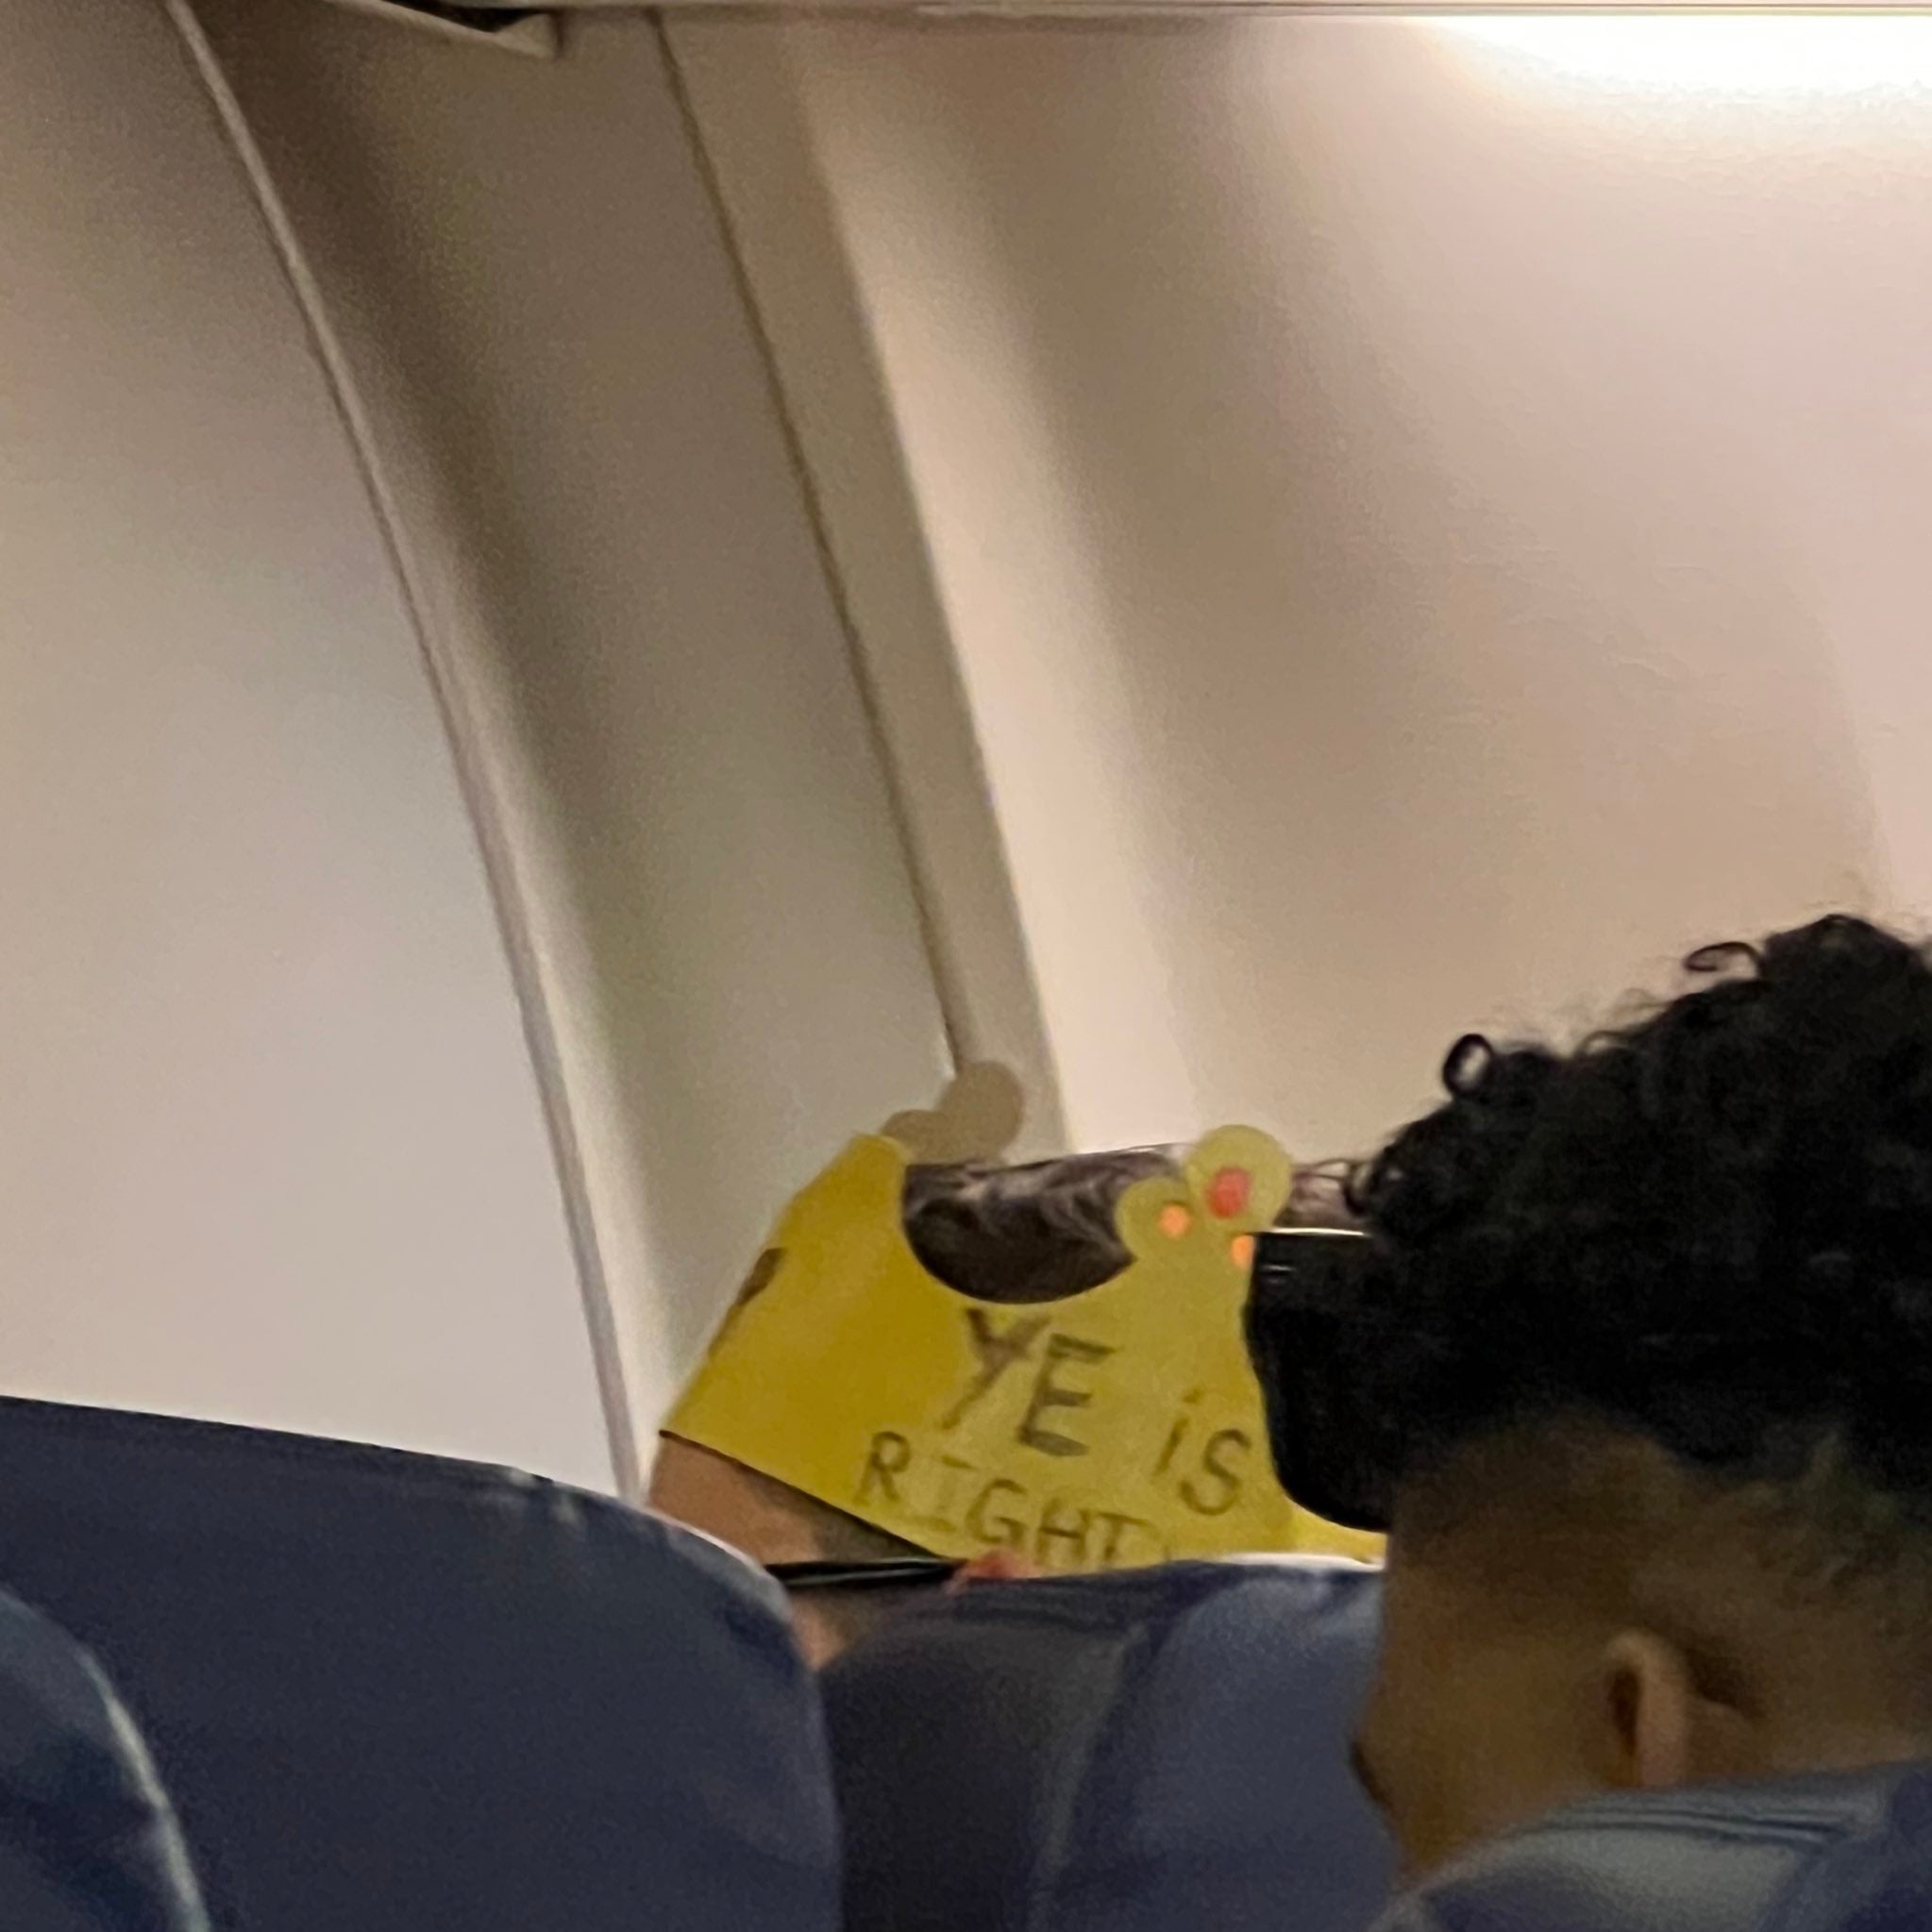 ‘Ye is right’ one passenger wrote on the cardboard crown, apparently in a reference to Kanye